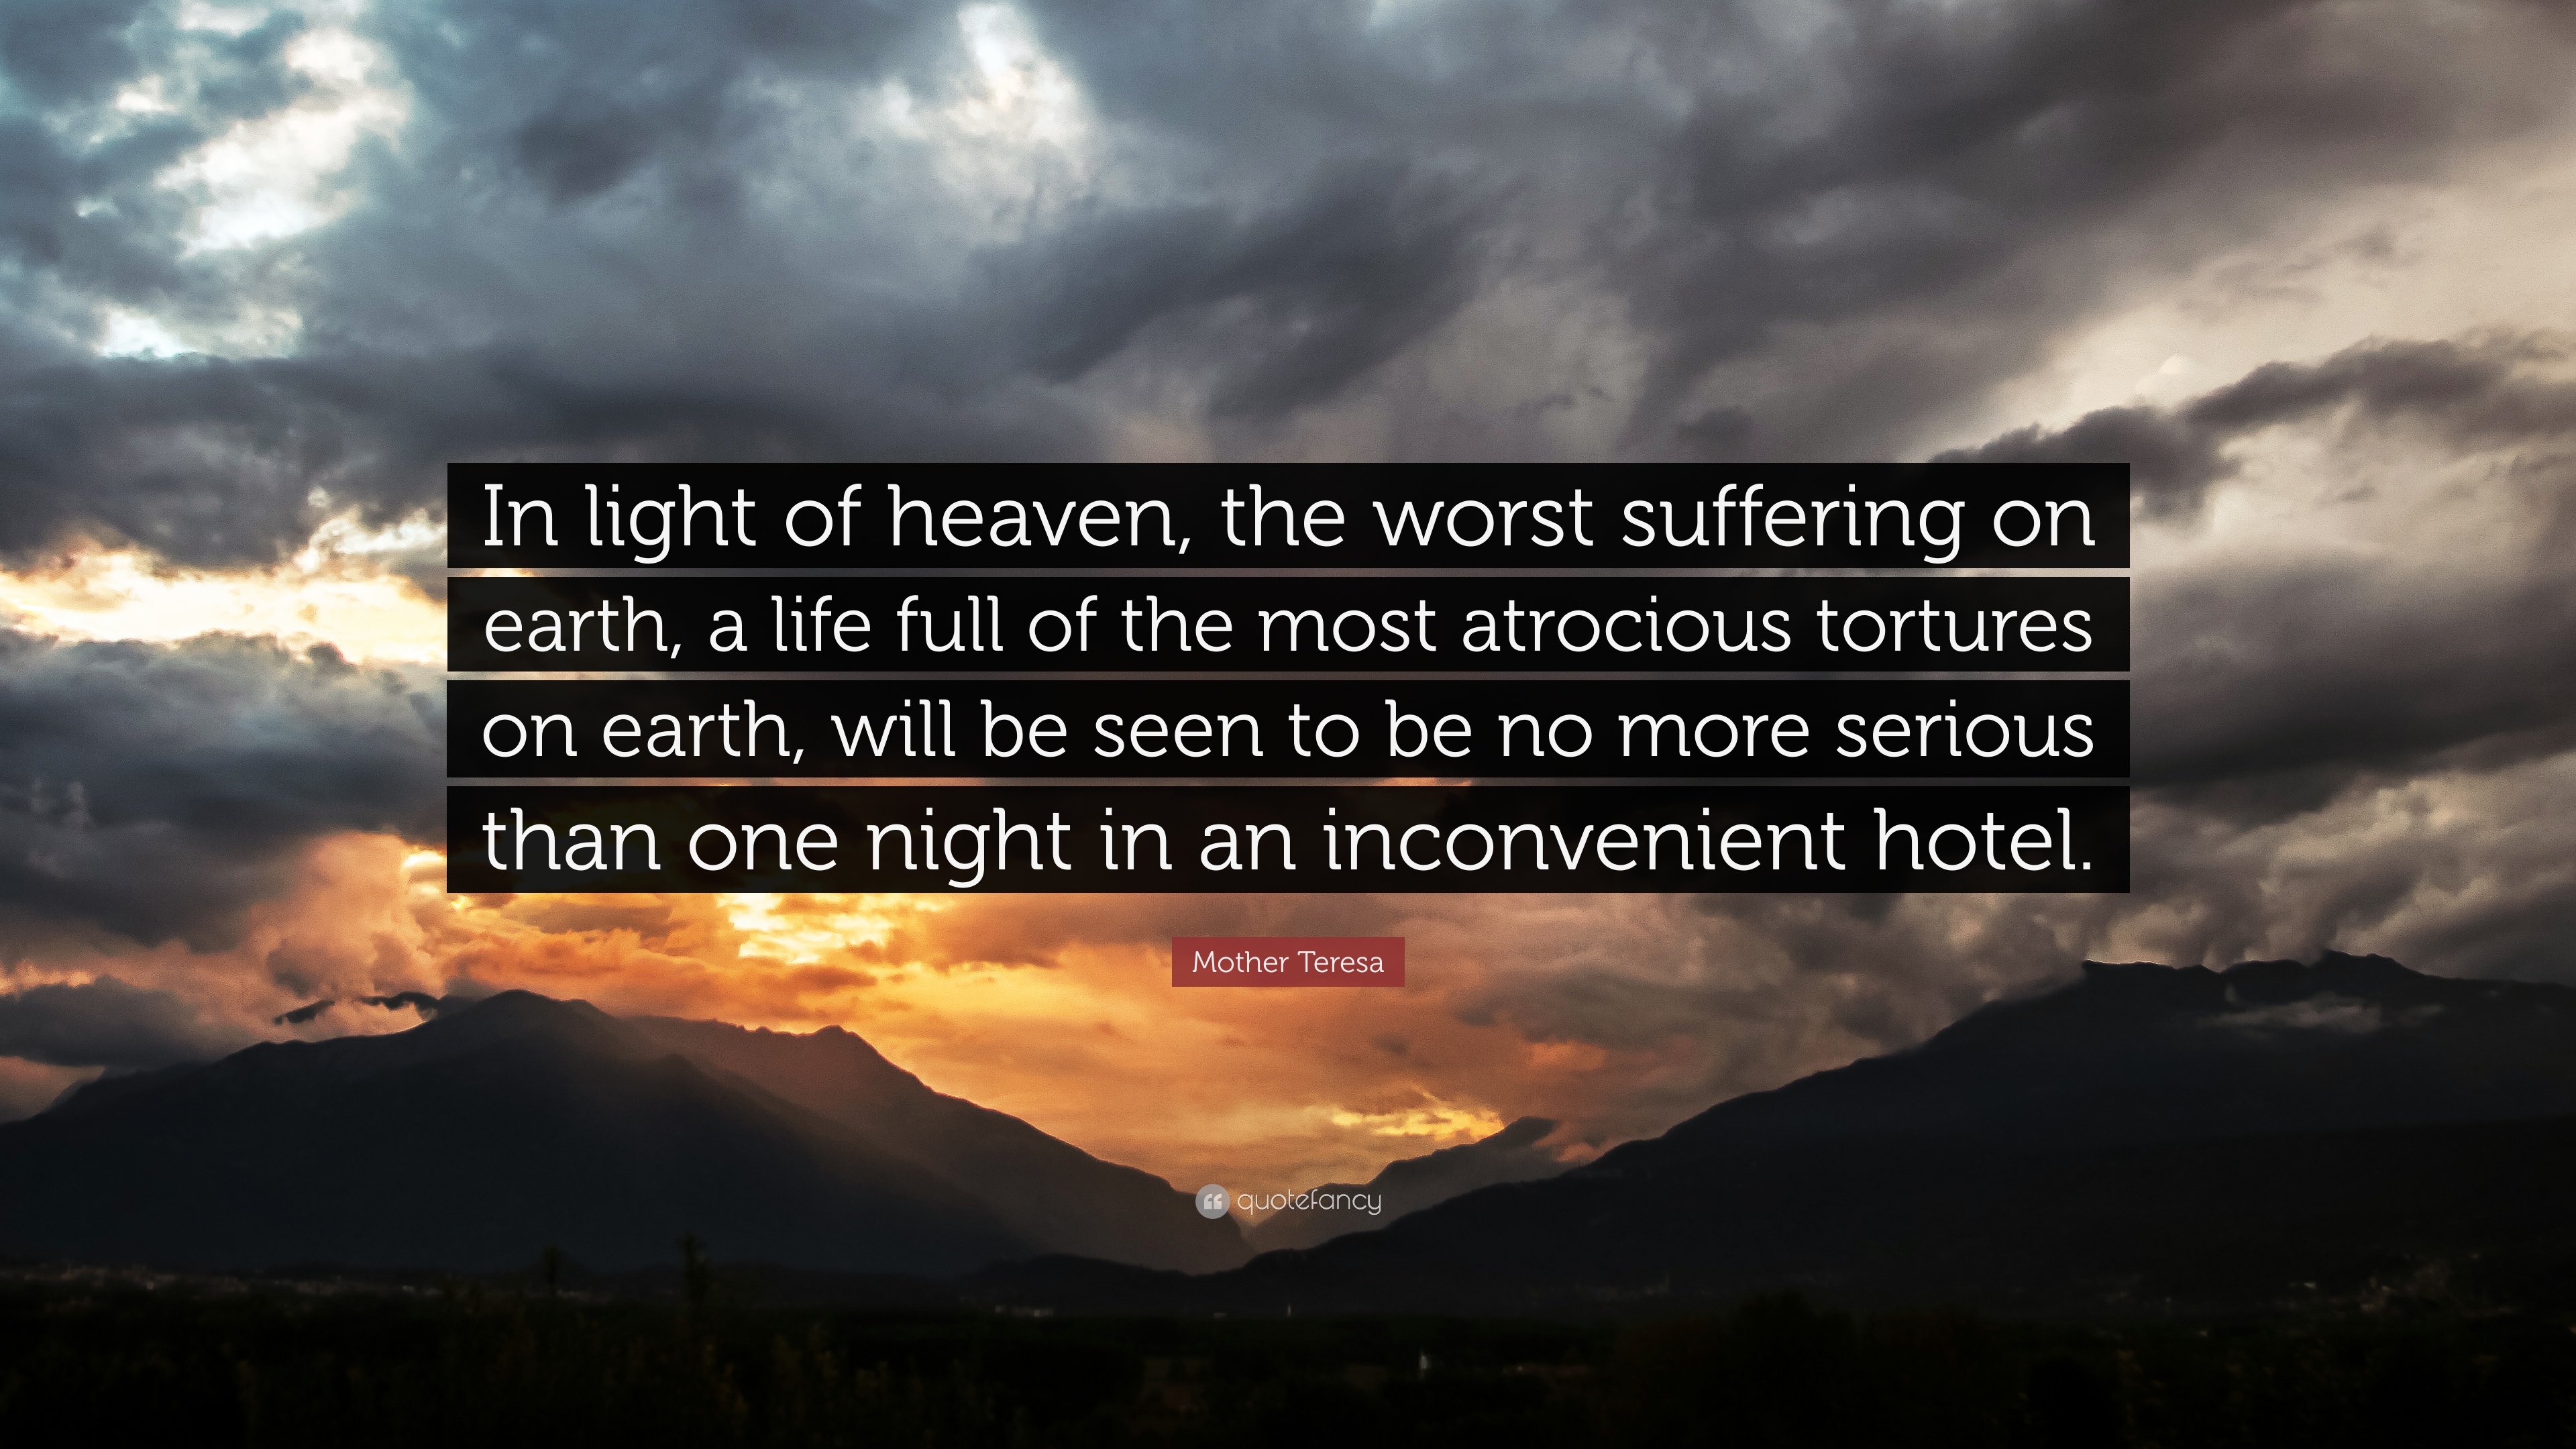 Mother Teresa Quote: “In light of heaven, the worst suffering on ...